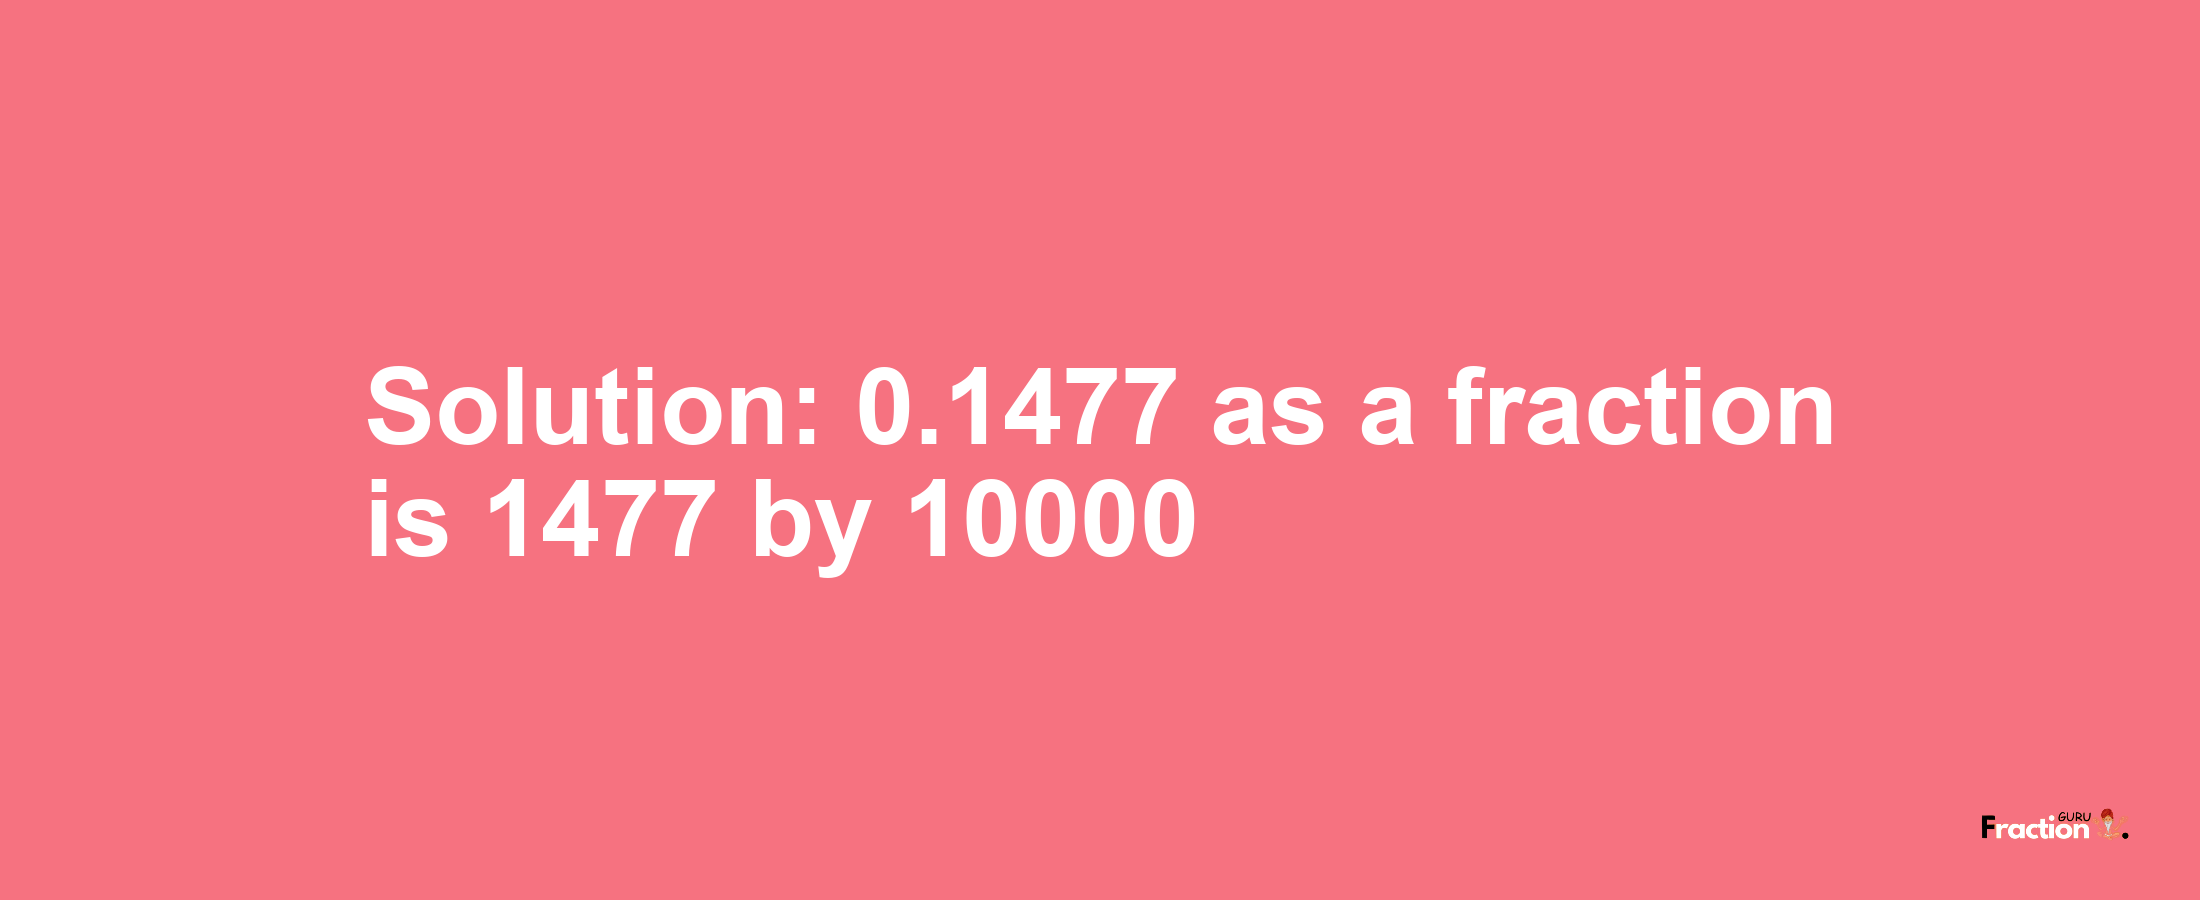 Solution:0.1477 as a fraction is 1477/10000